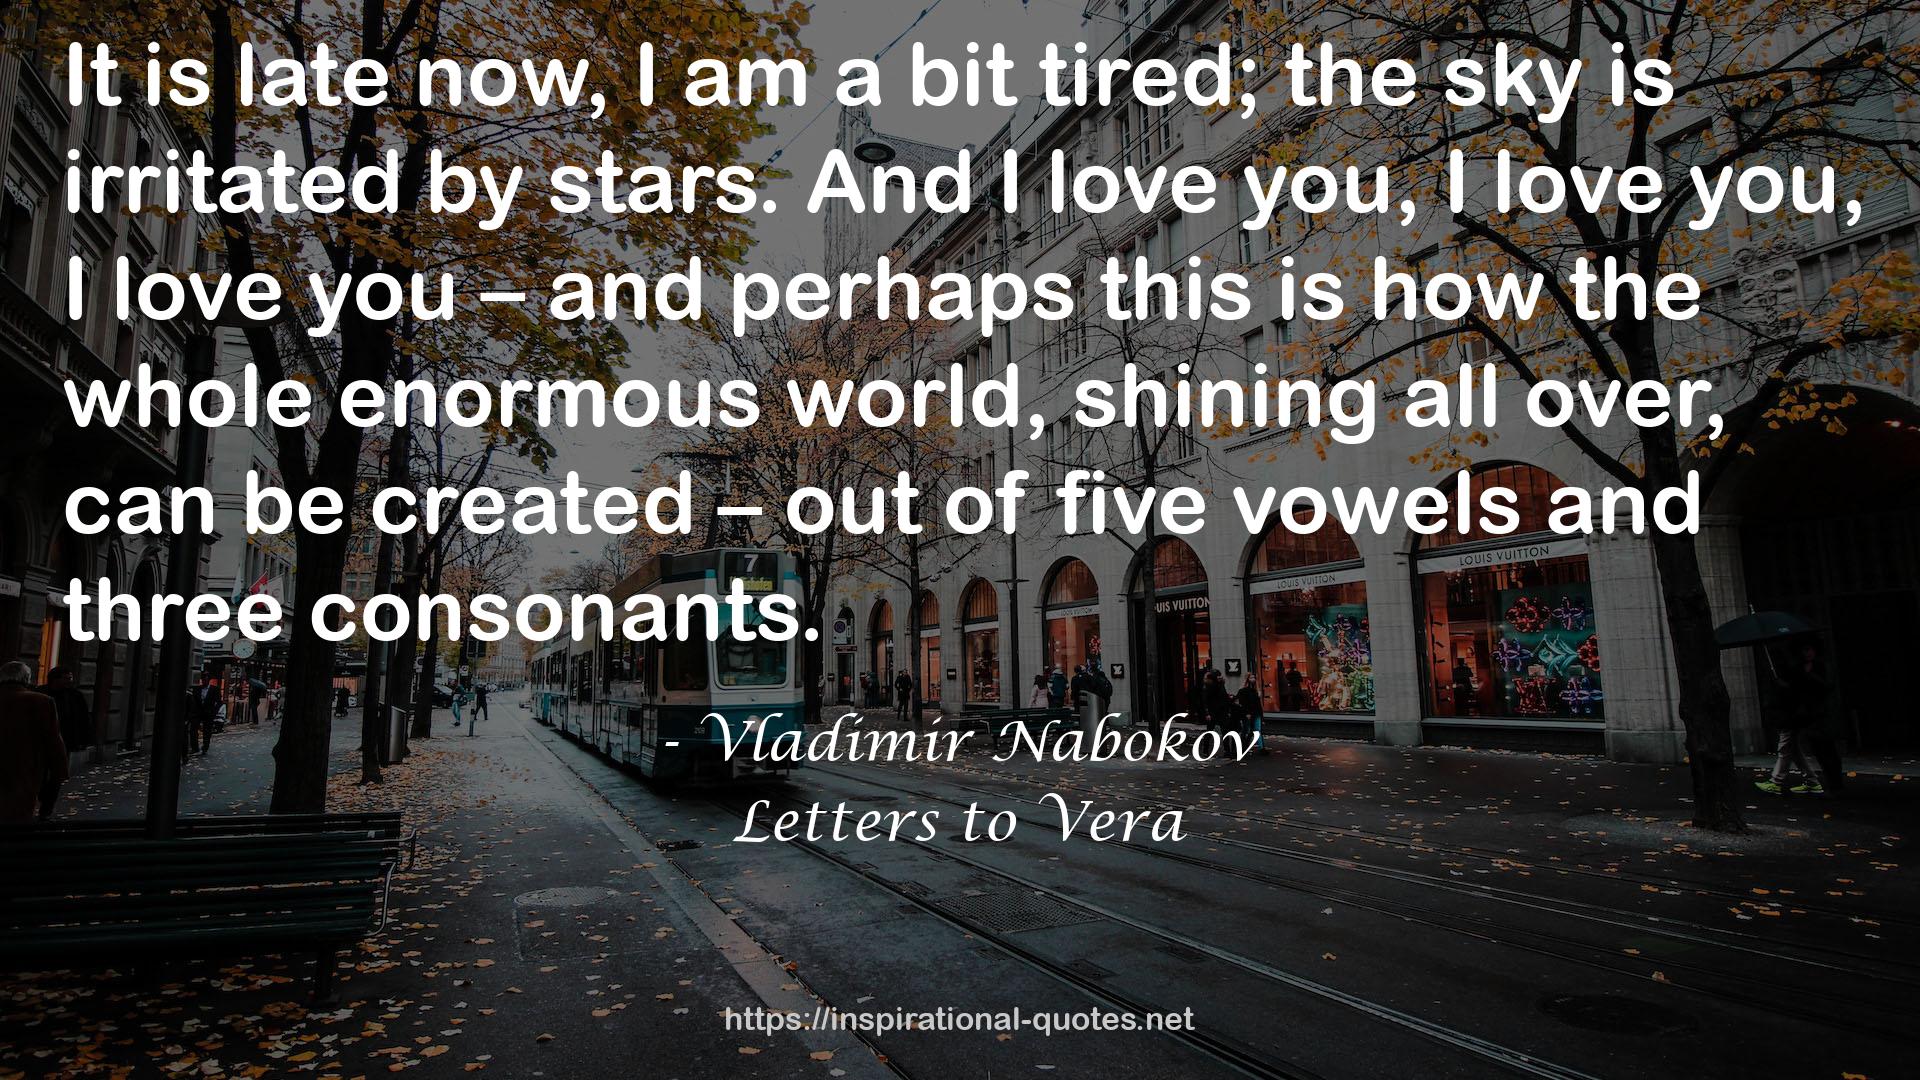 Letters to Vera QUOTES